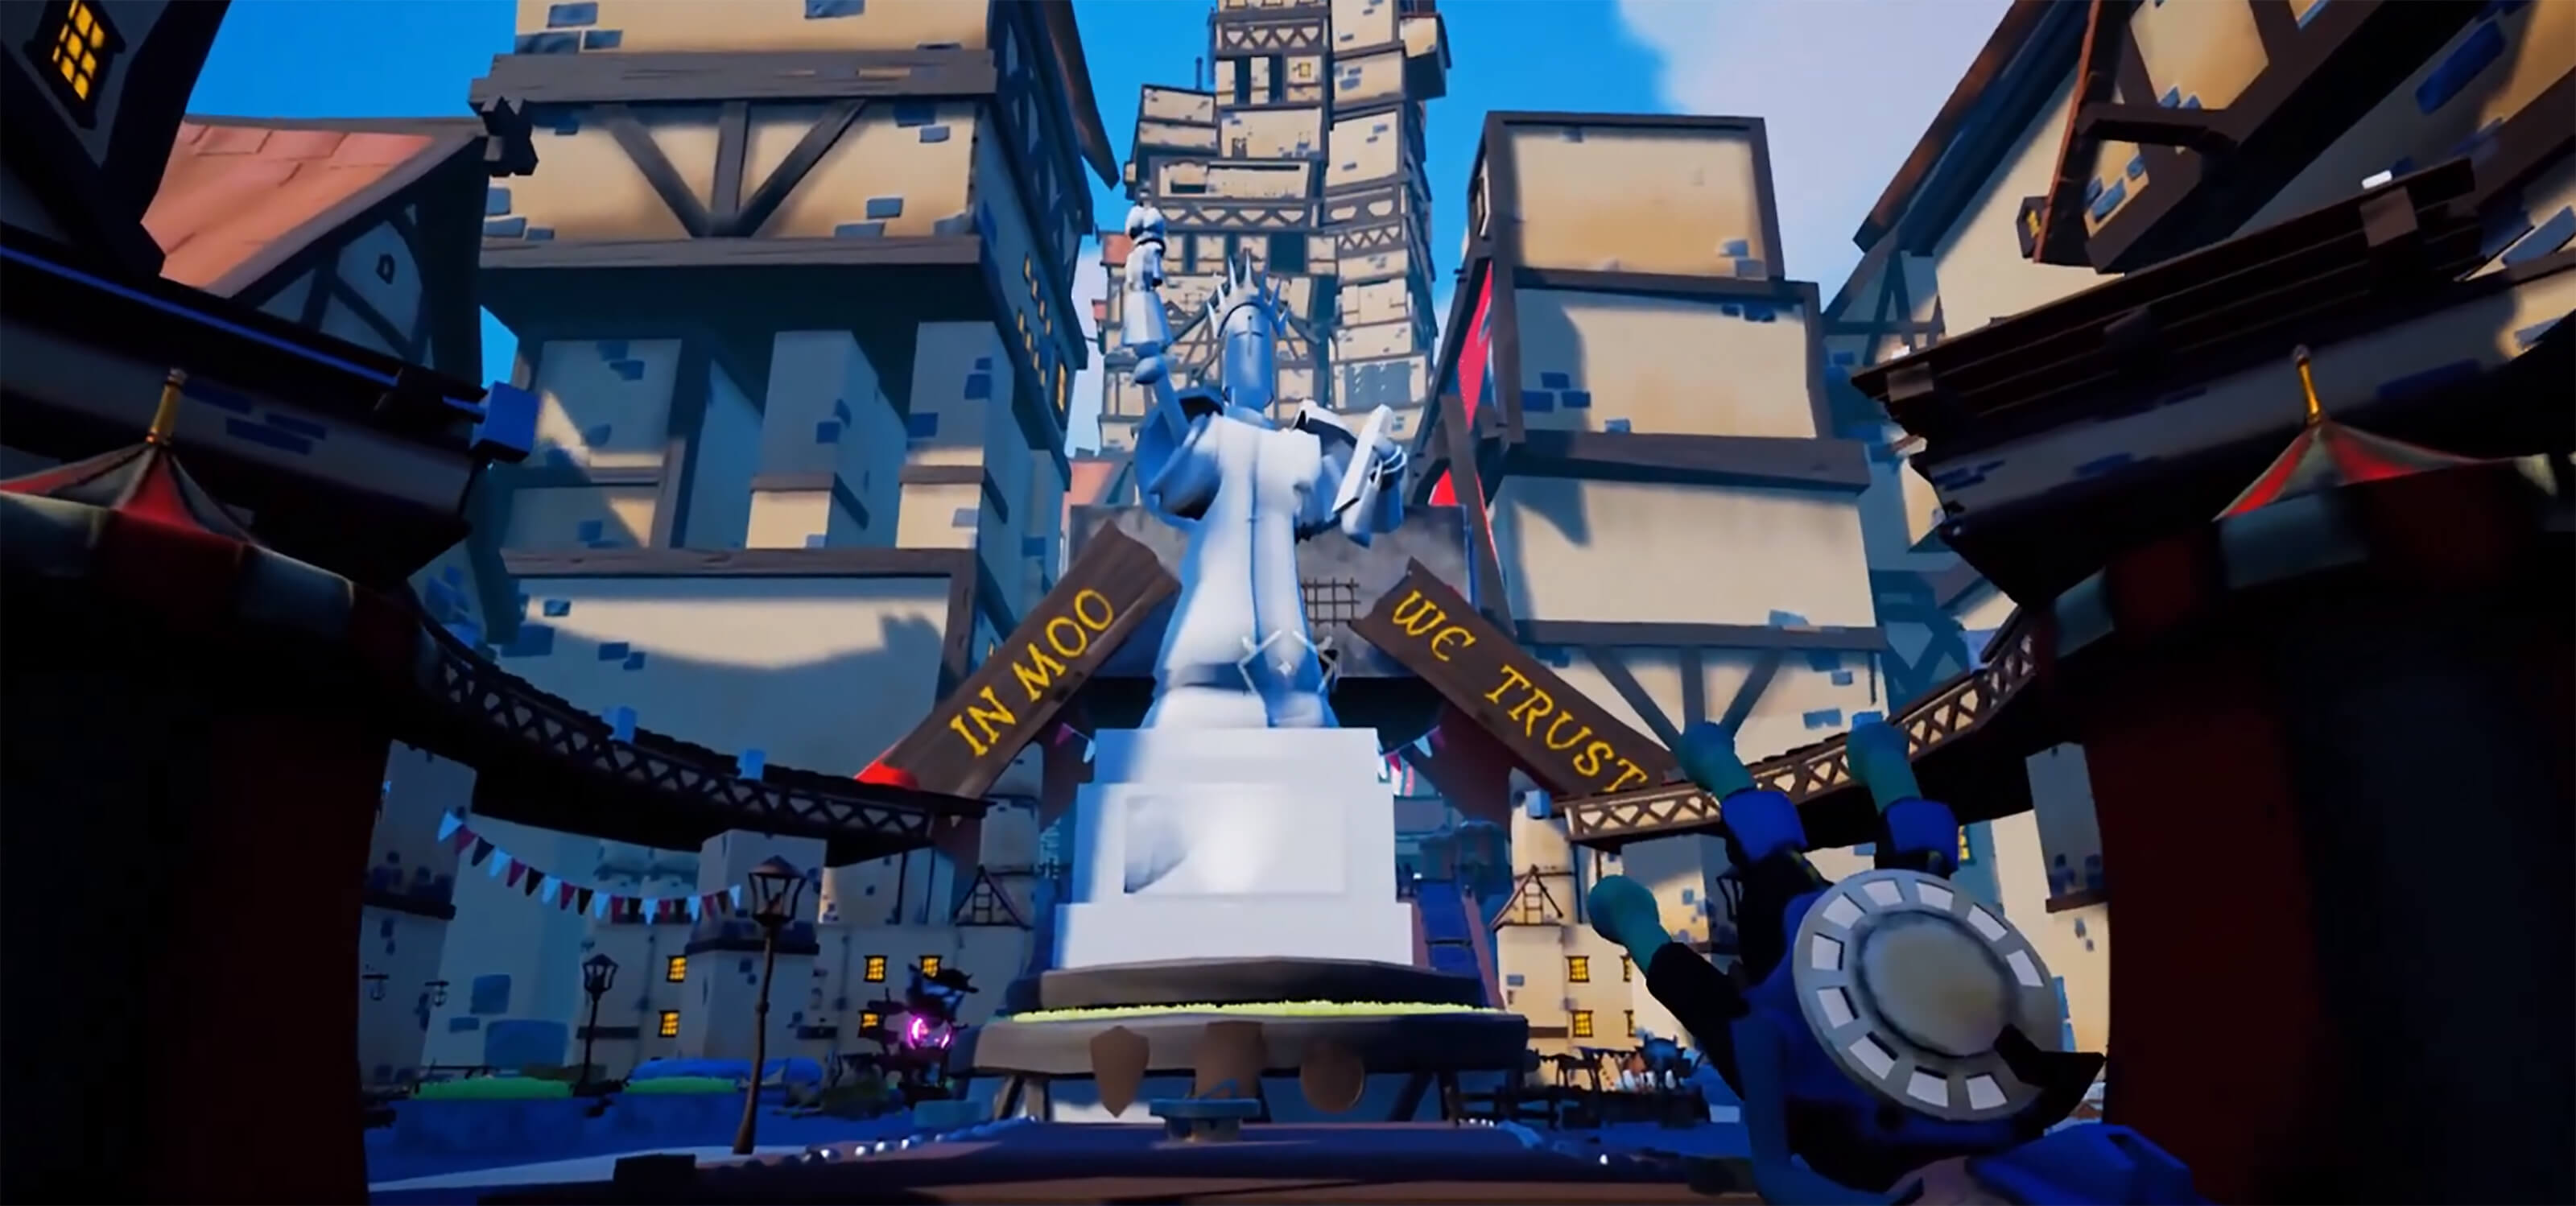 Game screenshot: Large marble statue stands in a medieval town plaza. A sign reads: "In Moo We Trust"